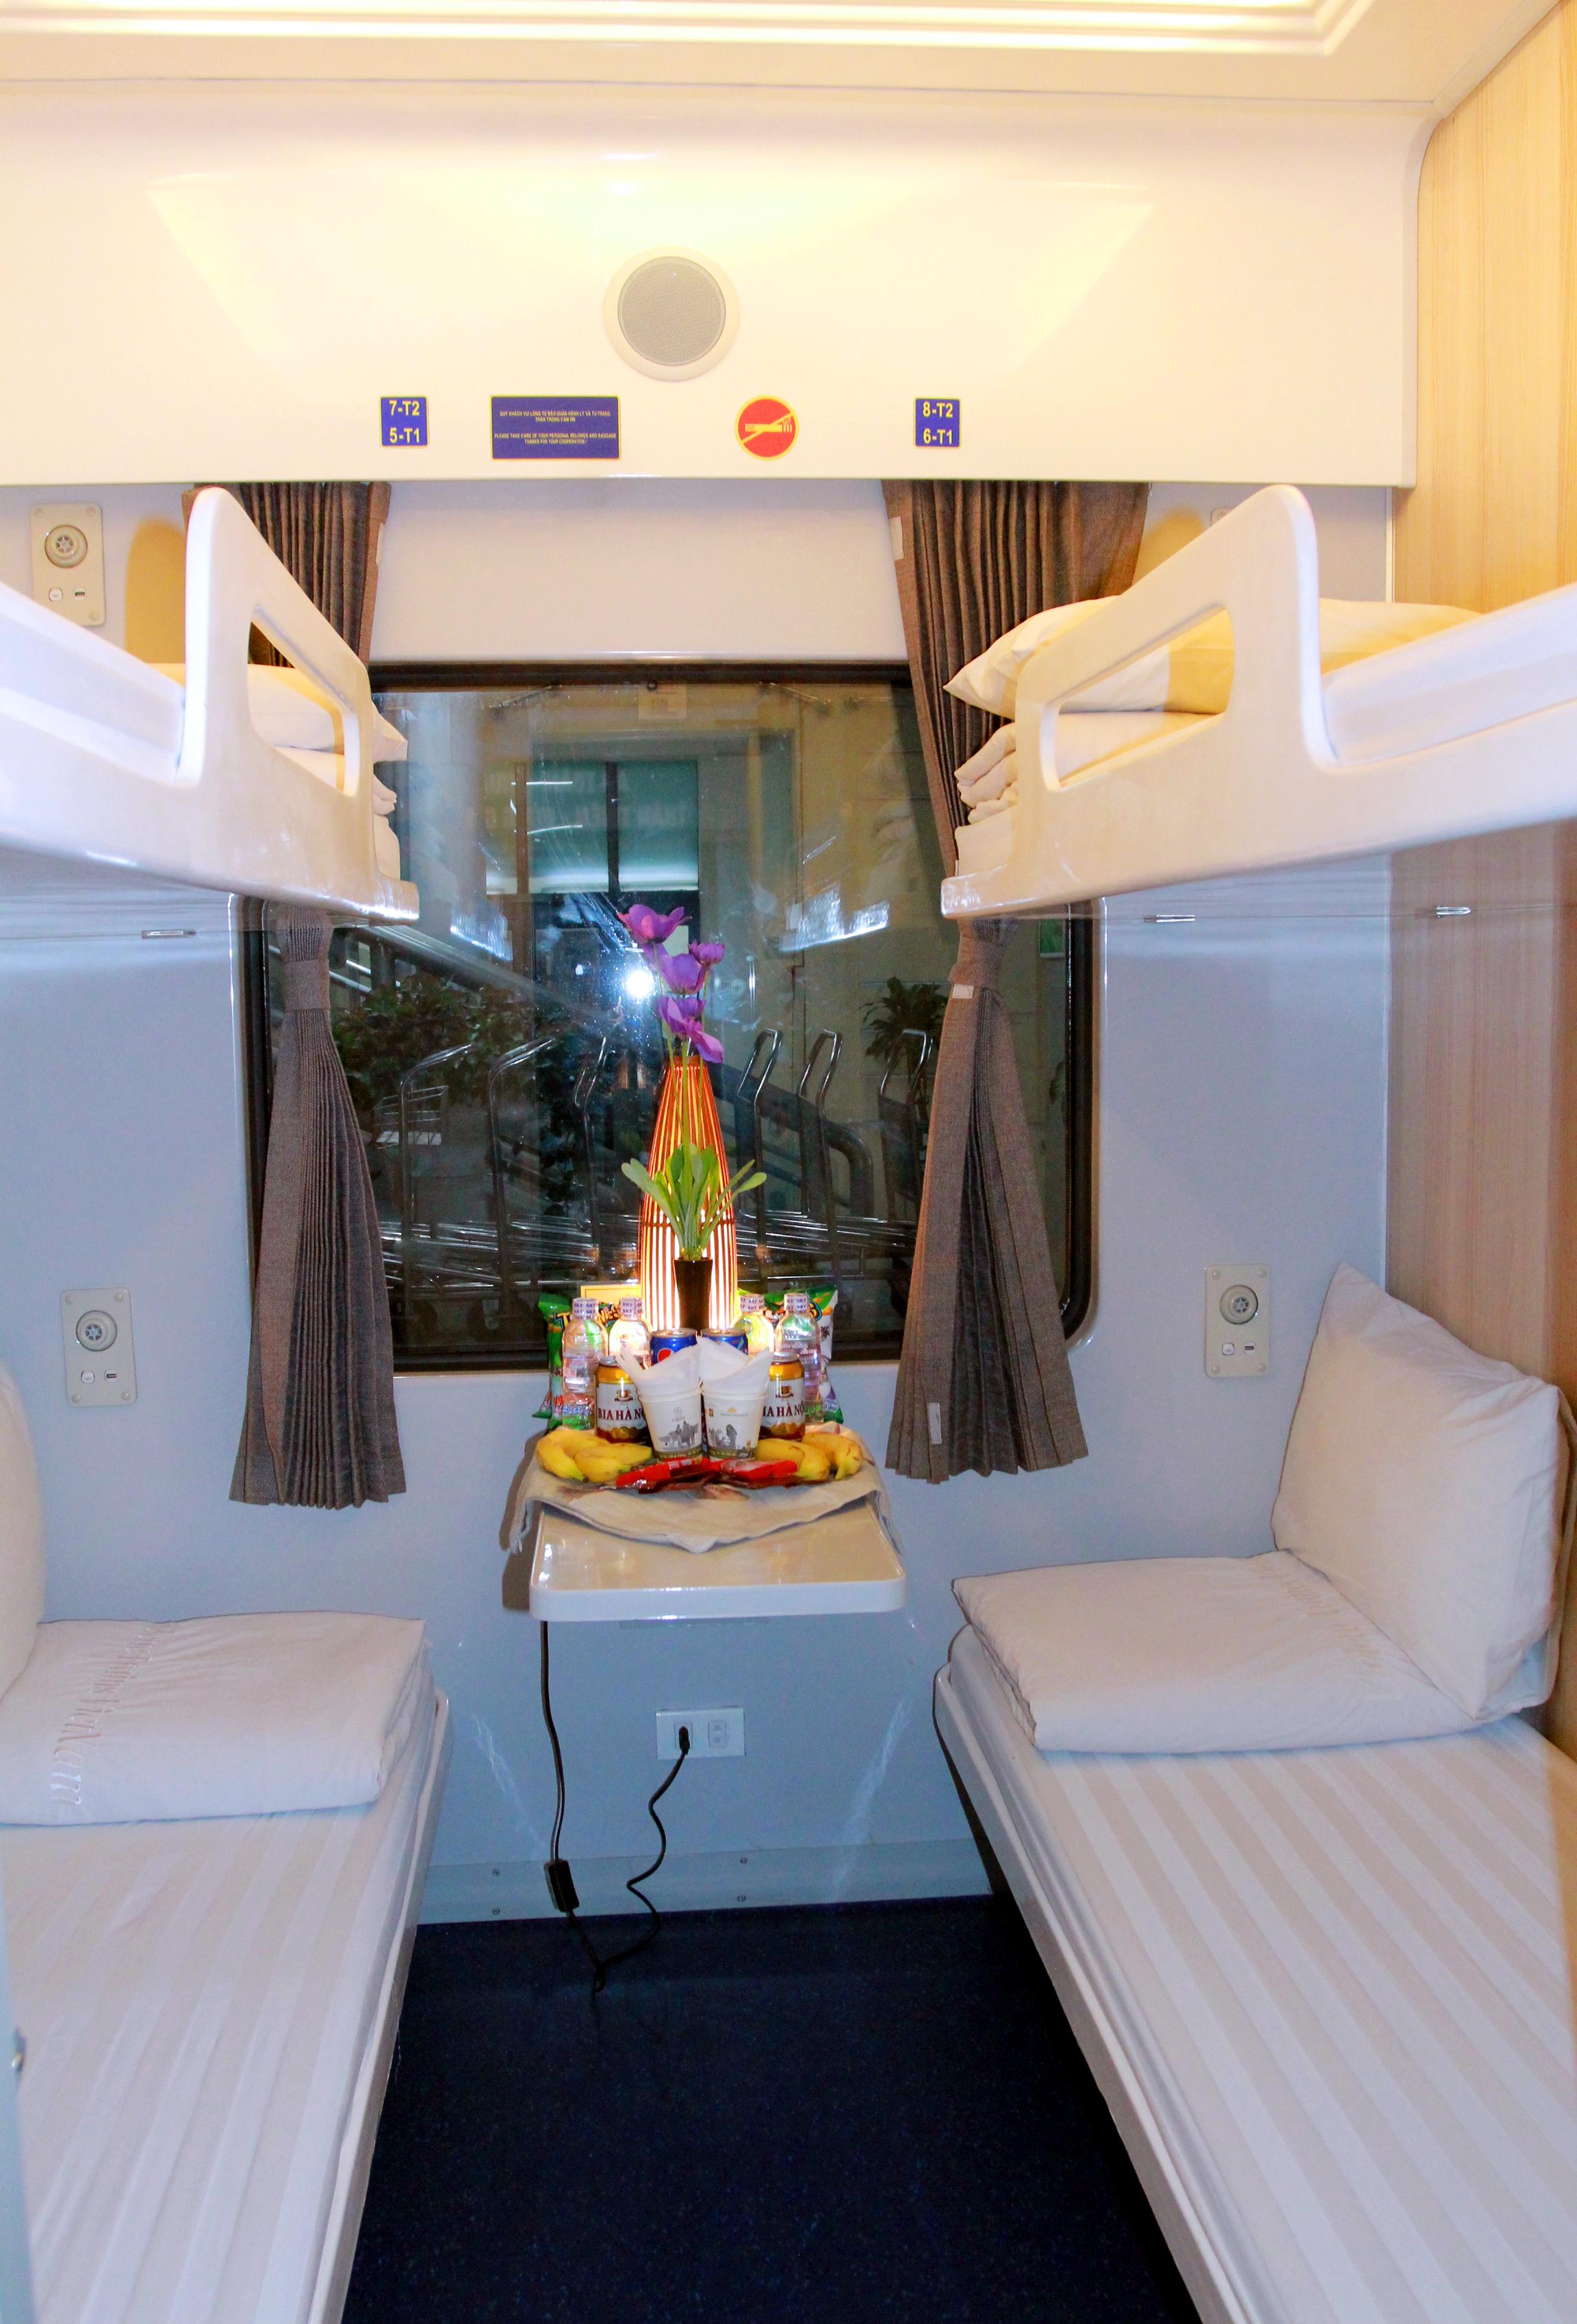 Hà Nội – Huế  (19h25 – 08h55)  (Deluxe 4 Berths Cabin, One Way)